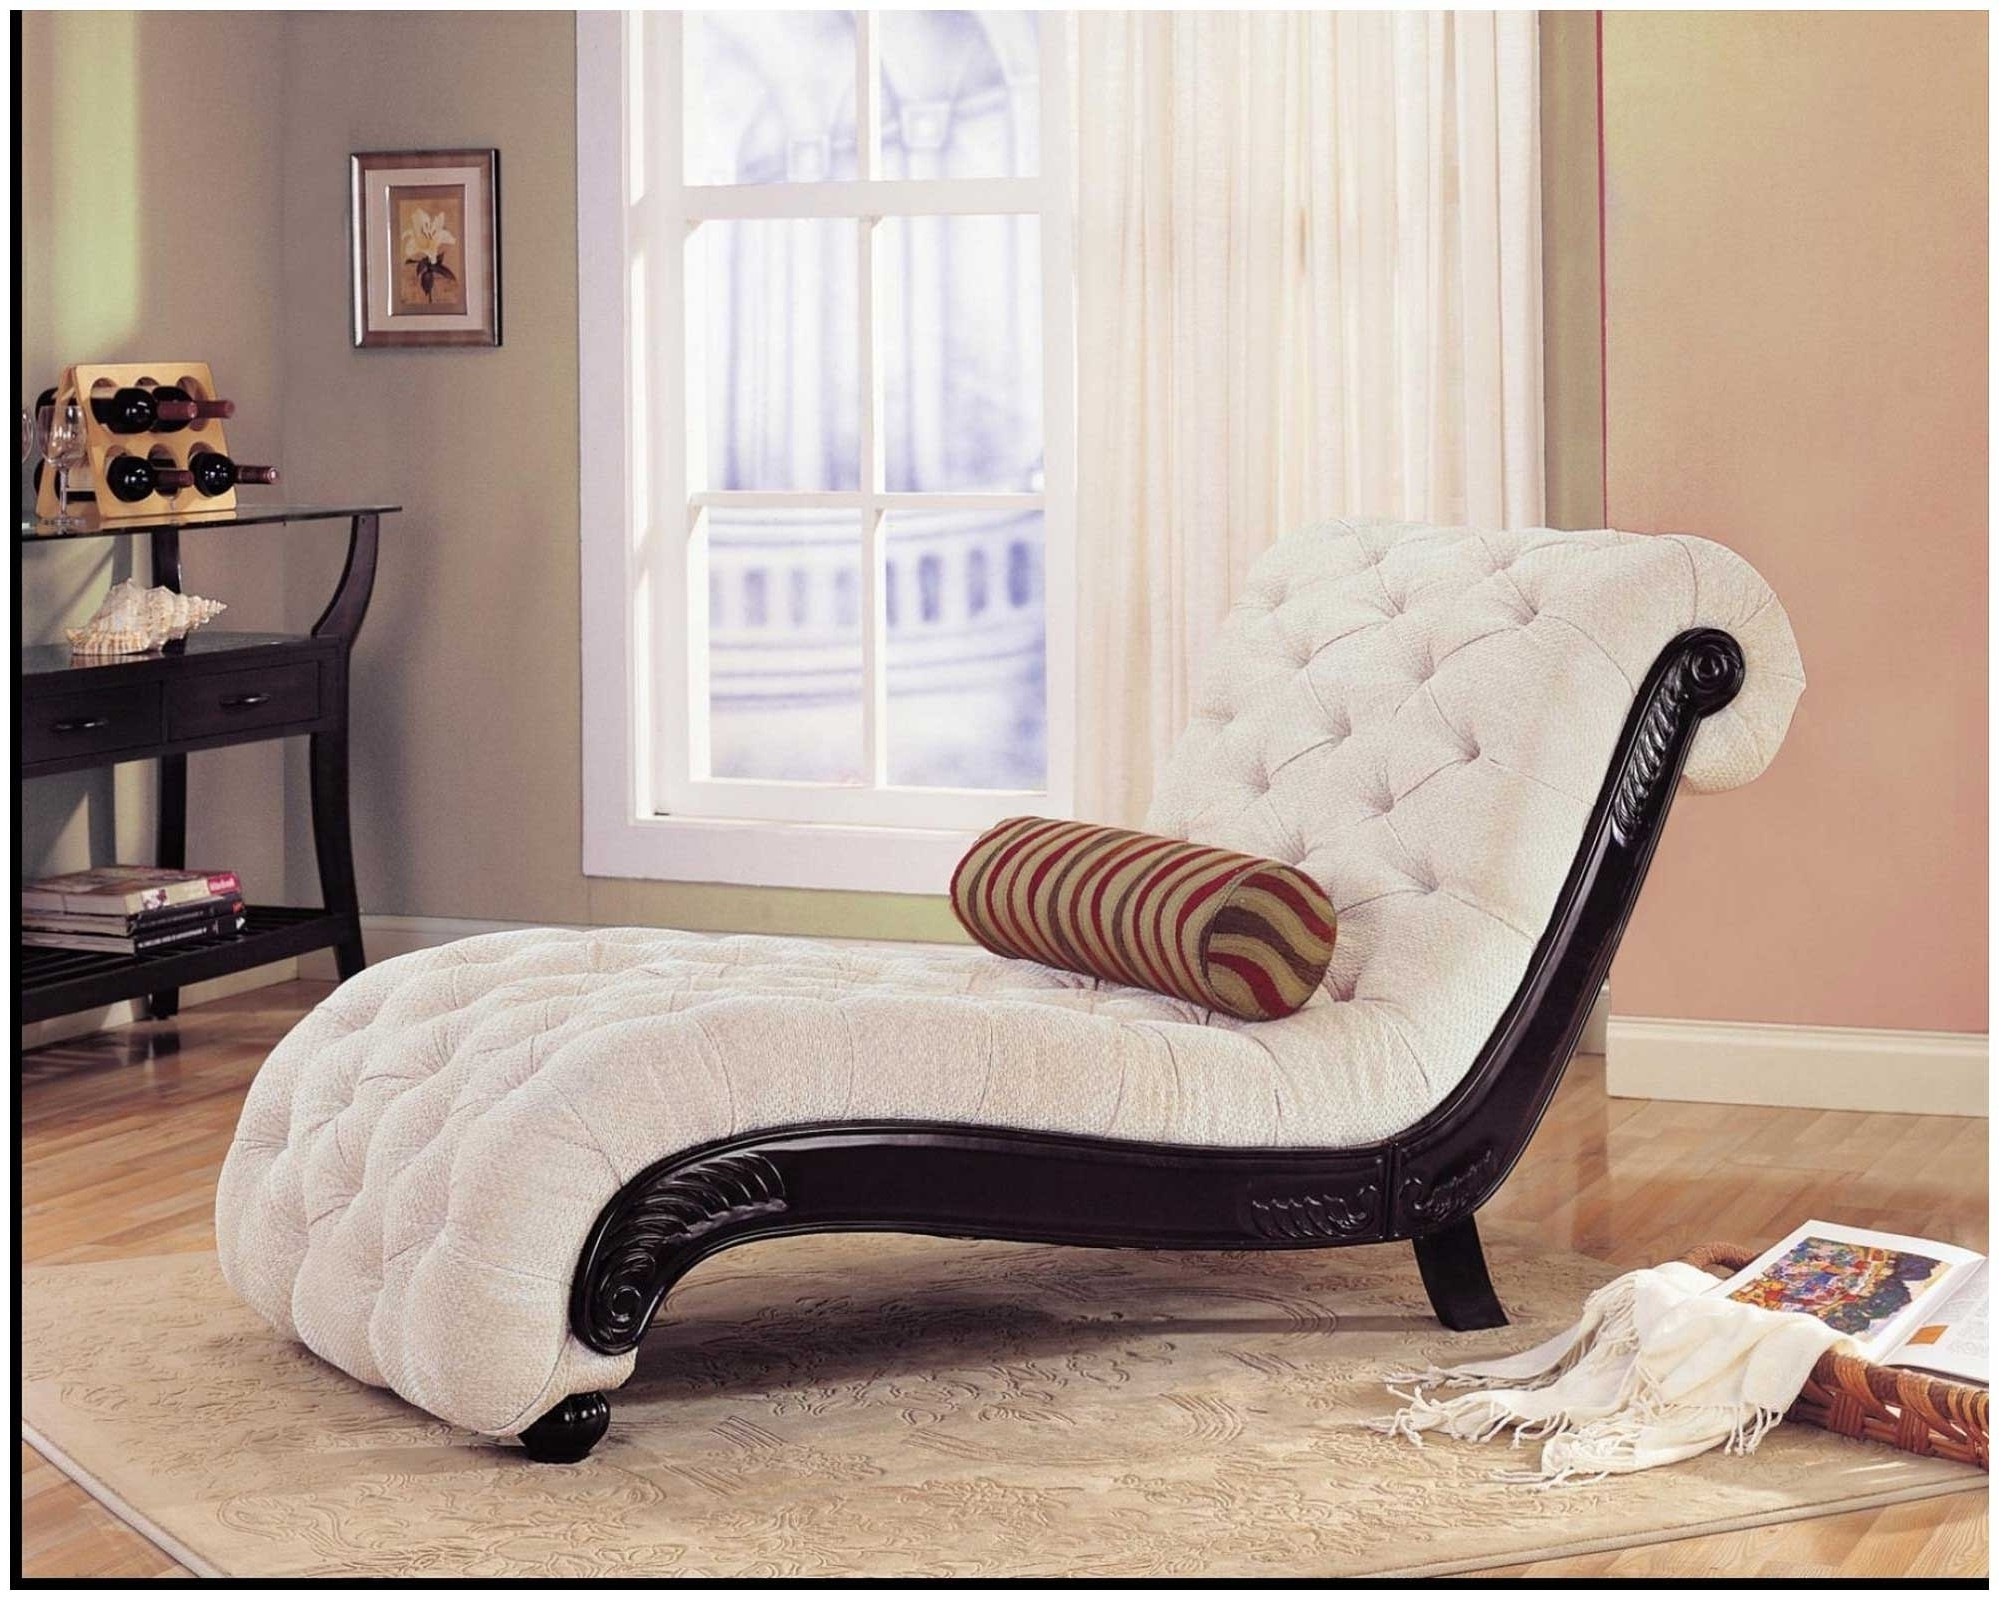 Small Lounge Chair For Bedroom
 2020 Latest Small Chaise Lounge Chairs For Bedroom